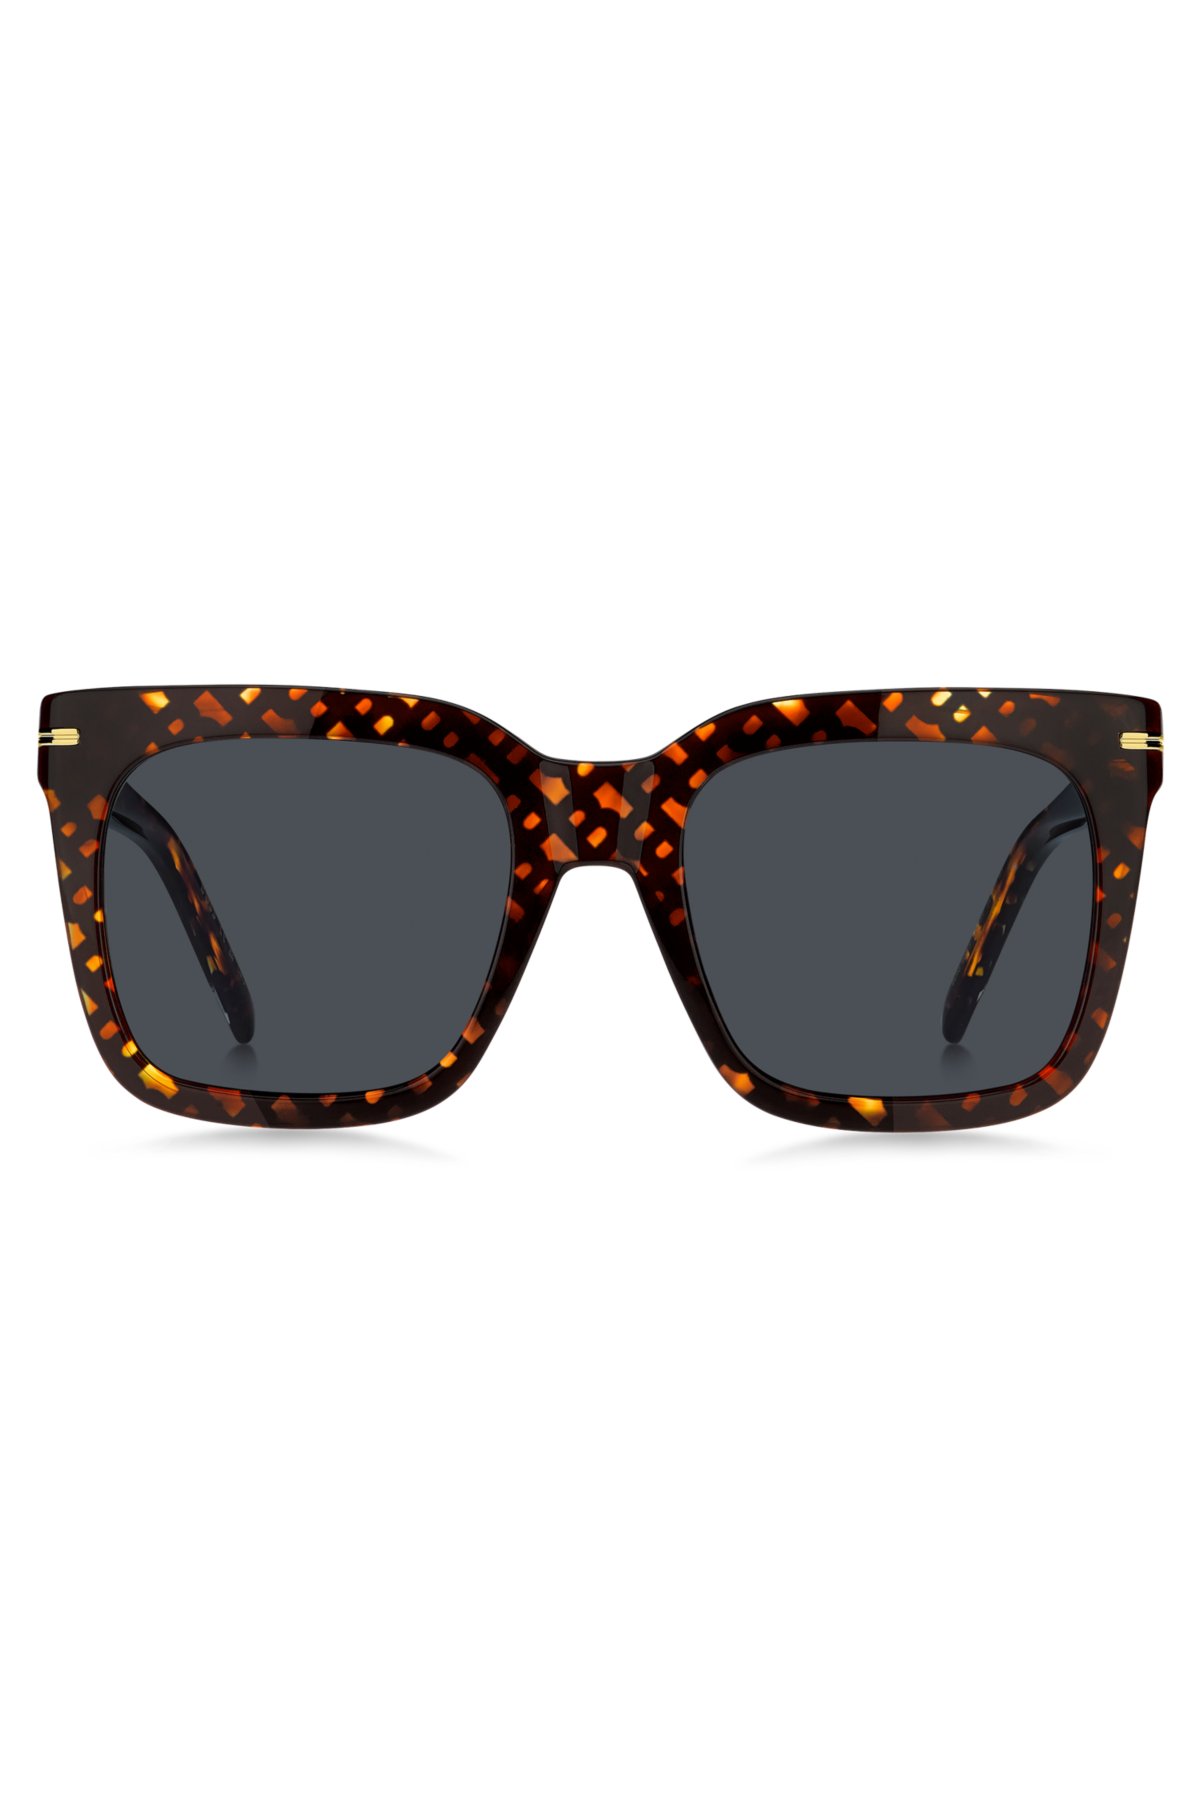 Monogram-patterned sunglasses with gold-tone hardware, Patterned